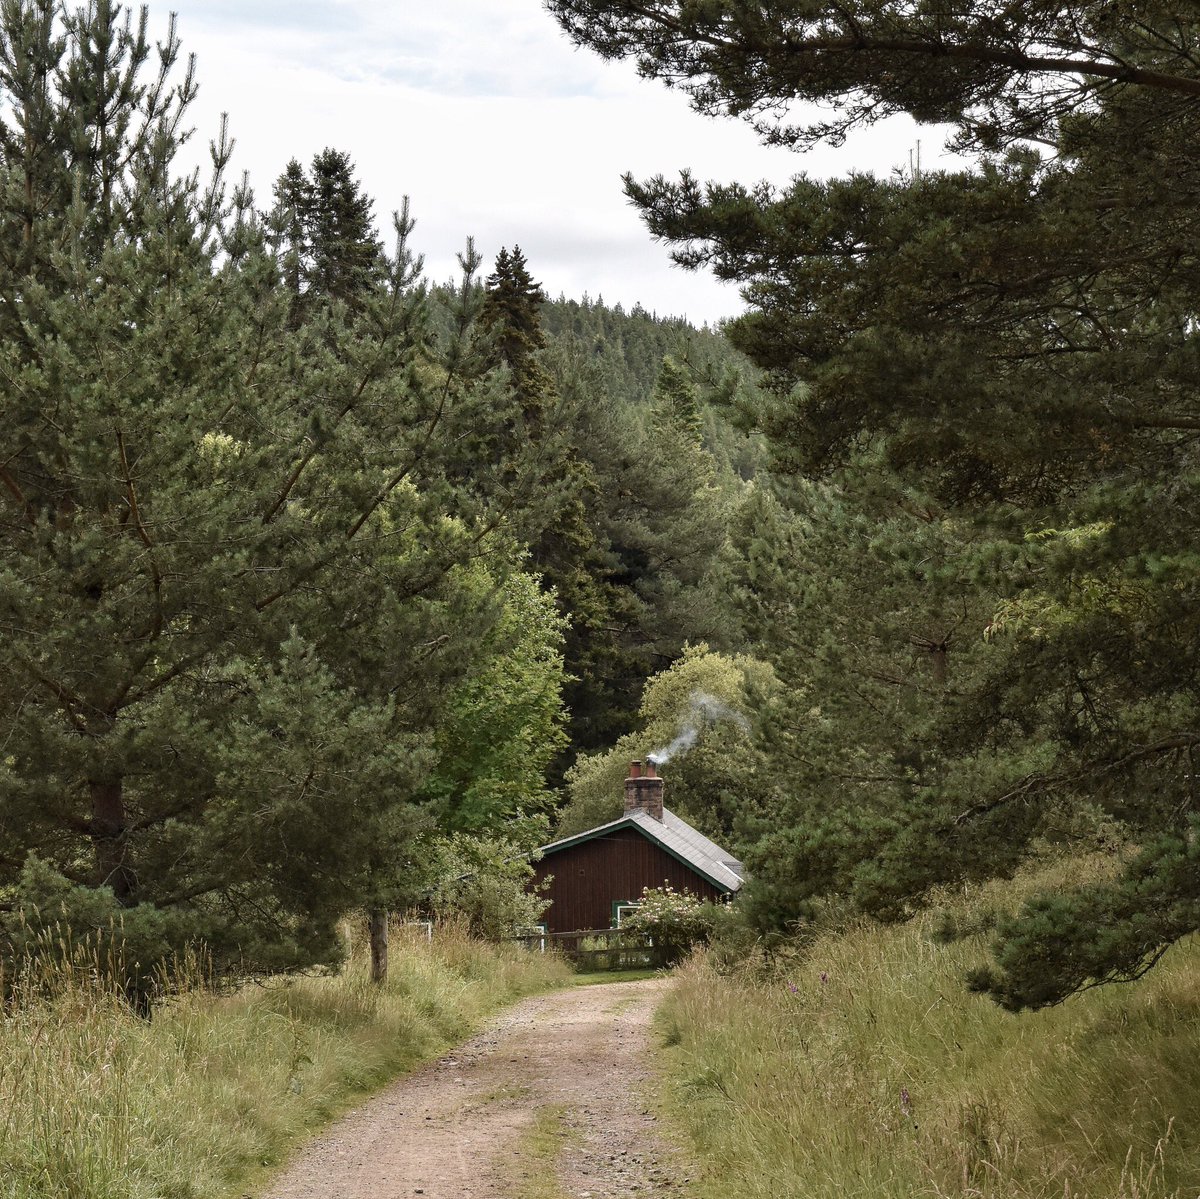 The cabin in the woods at @Glen_Tanar 🏡 Its cosy fire smell filling the air along with the surrounding pine, I wish I could bottle it!! 🥾🍃 #hiking #walking #aberdeenshire #glentanar #visitscotland @visitabdn @VisitCairngrms @VisitScotland @walkhighlands